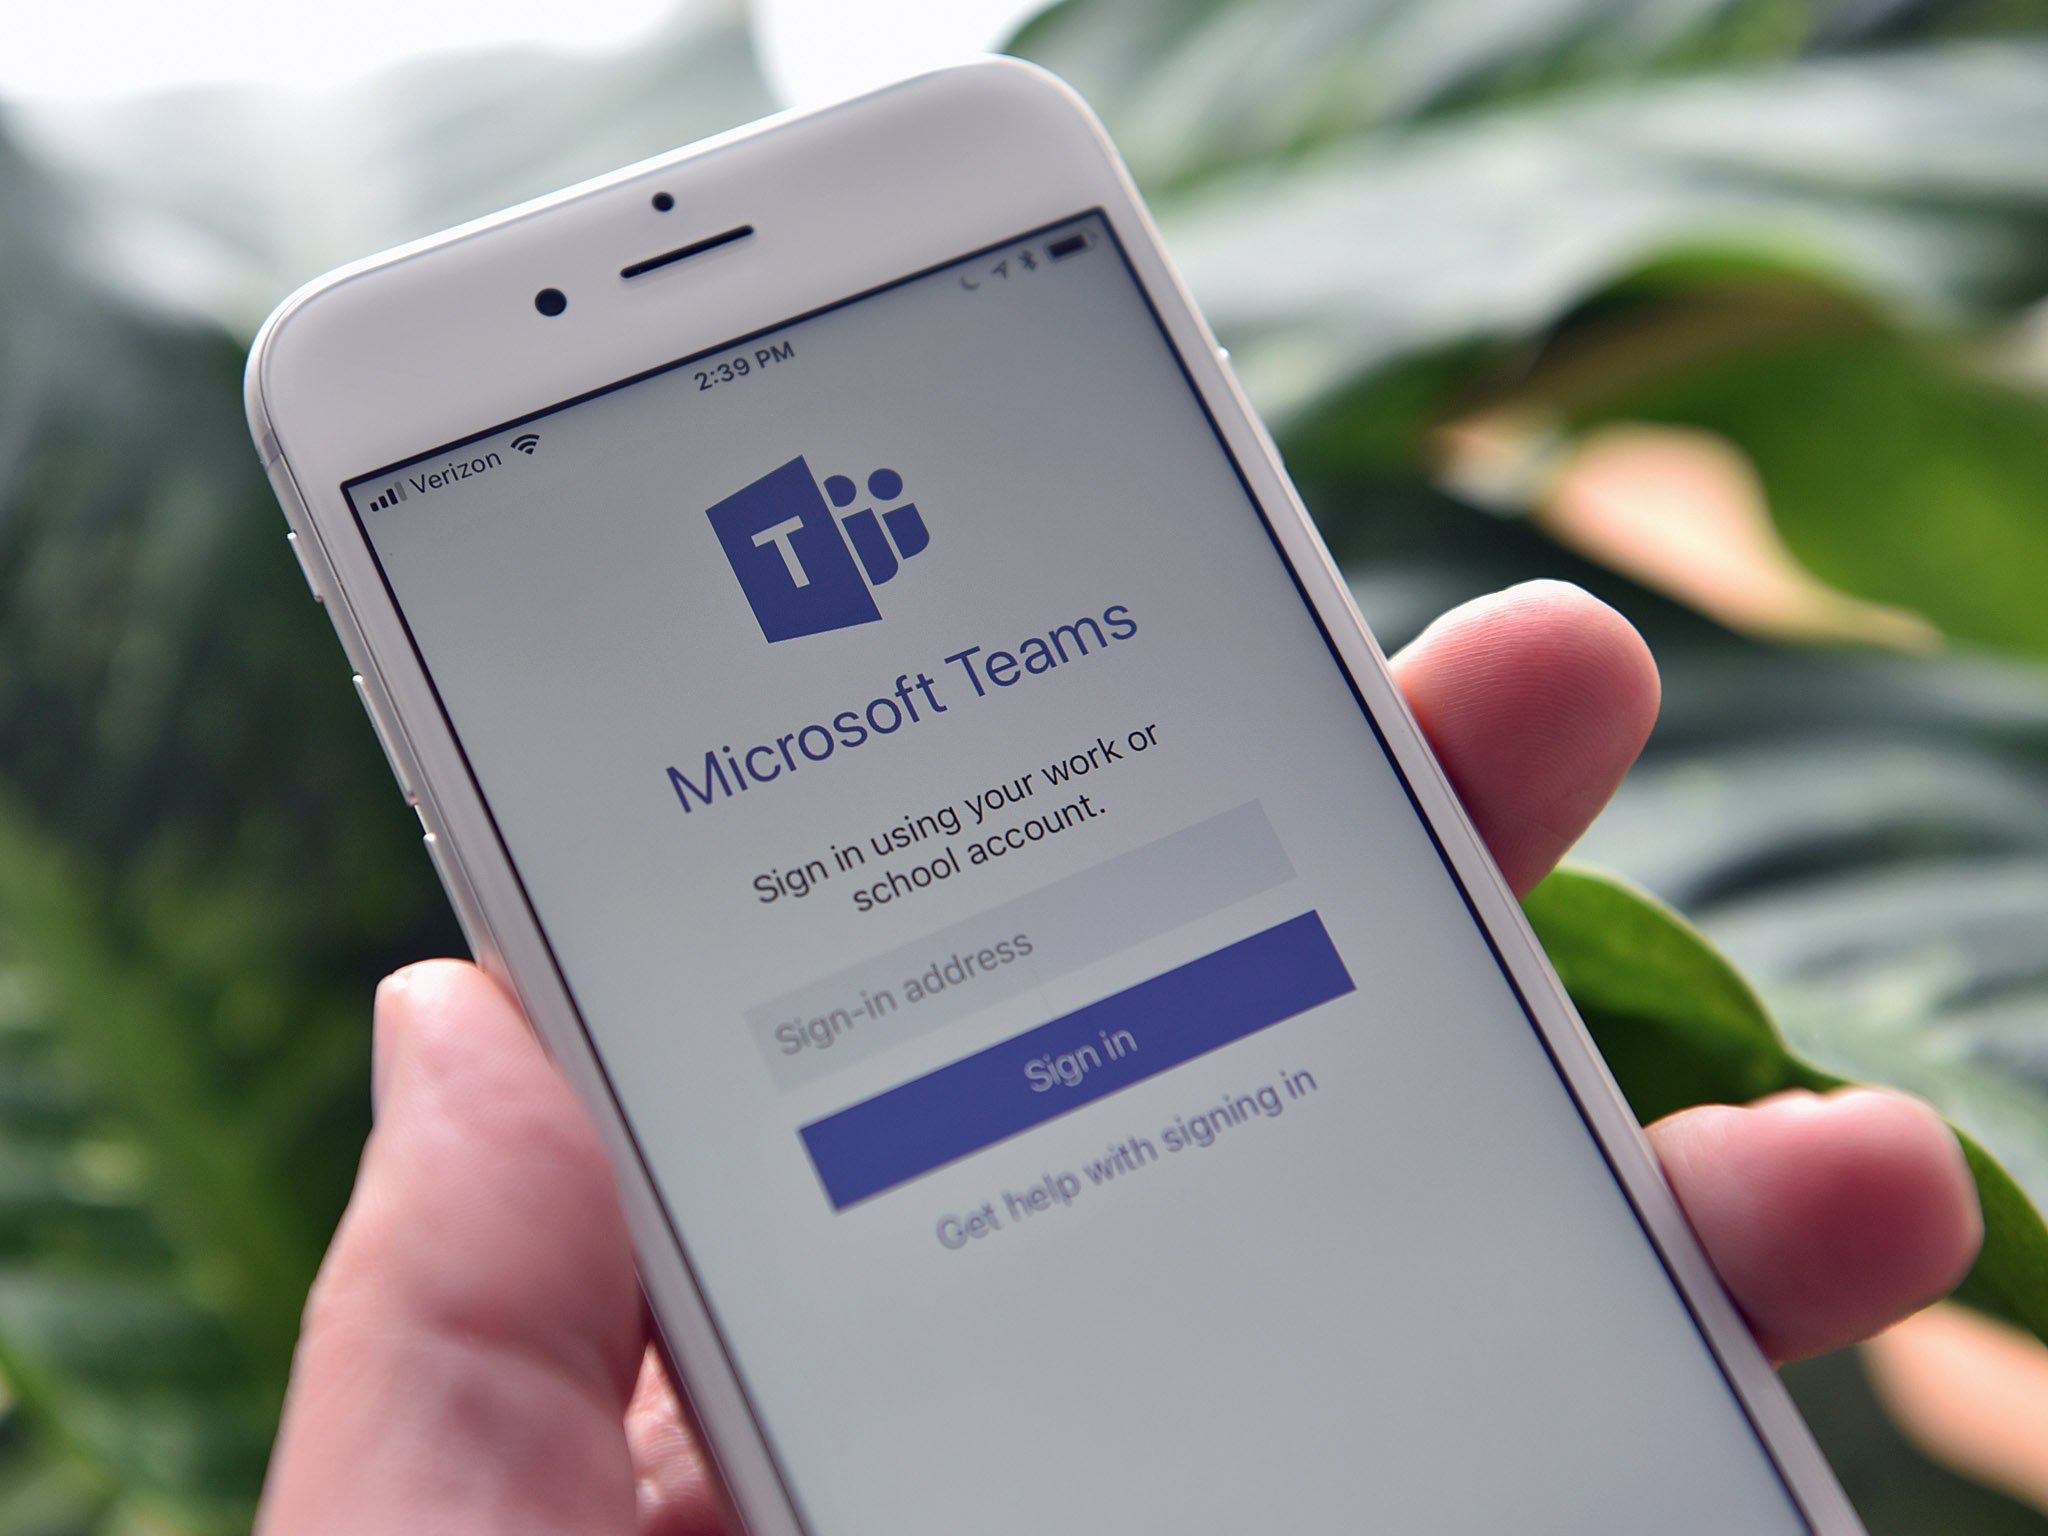 Microsoft Teams is now available to use for free